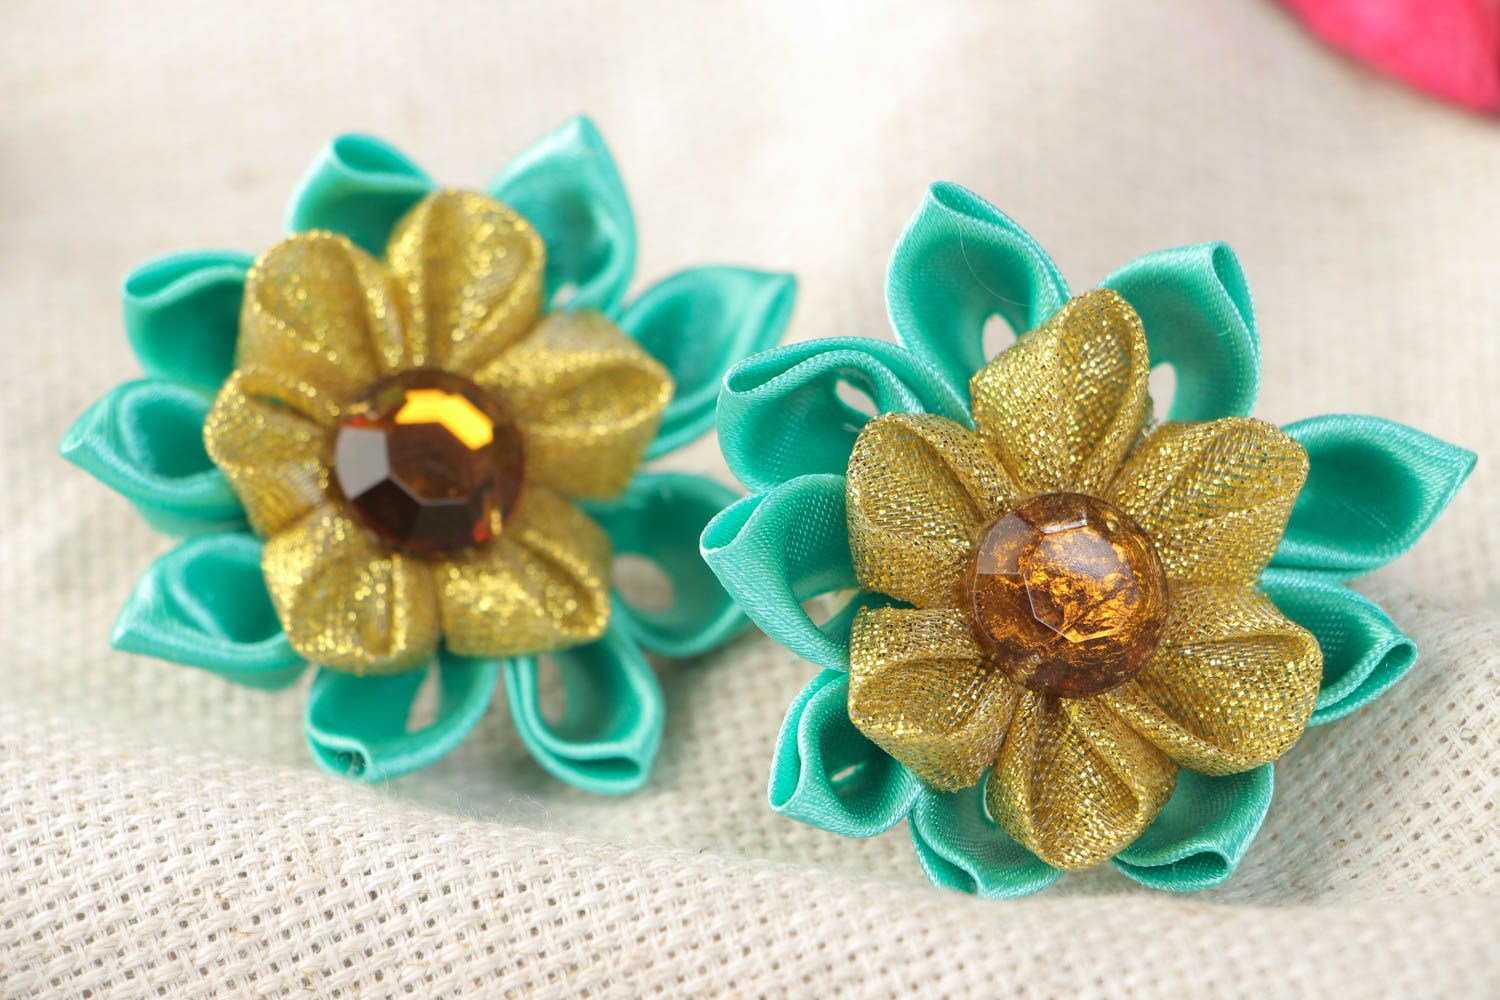 Handmade decorative hair ties with colorful kanzashi flowers set of 2 items photo 1